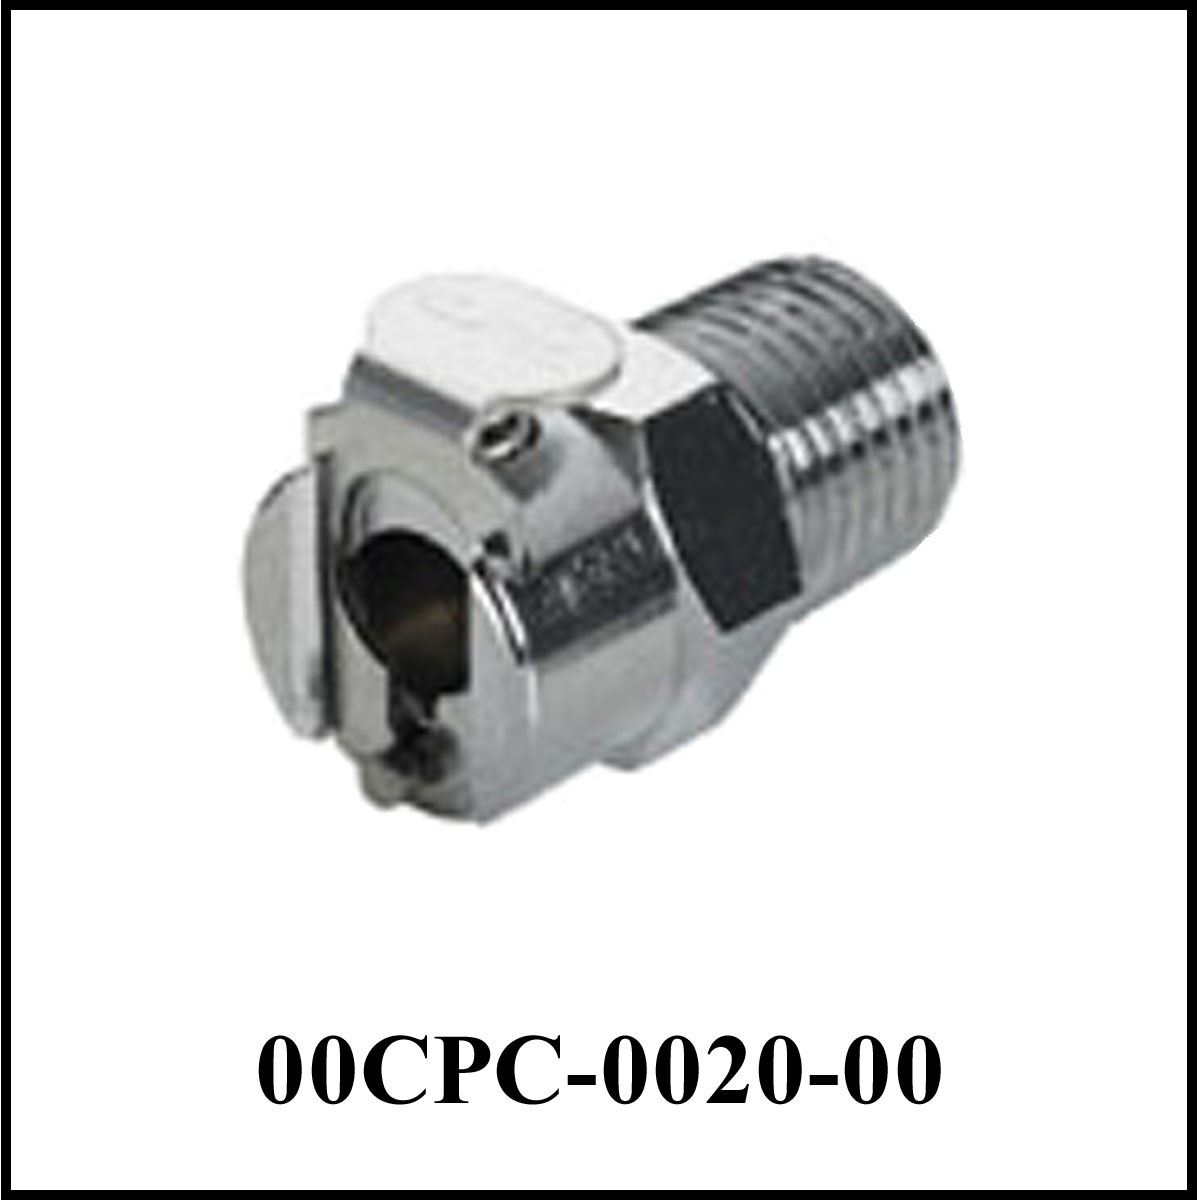 HFCD10812 High-Flow Quick-Disconnect Colder M 1/2” NPT Valved PP Body CPC